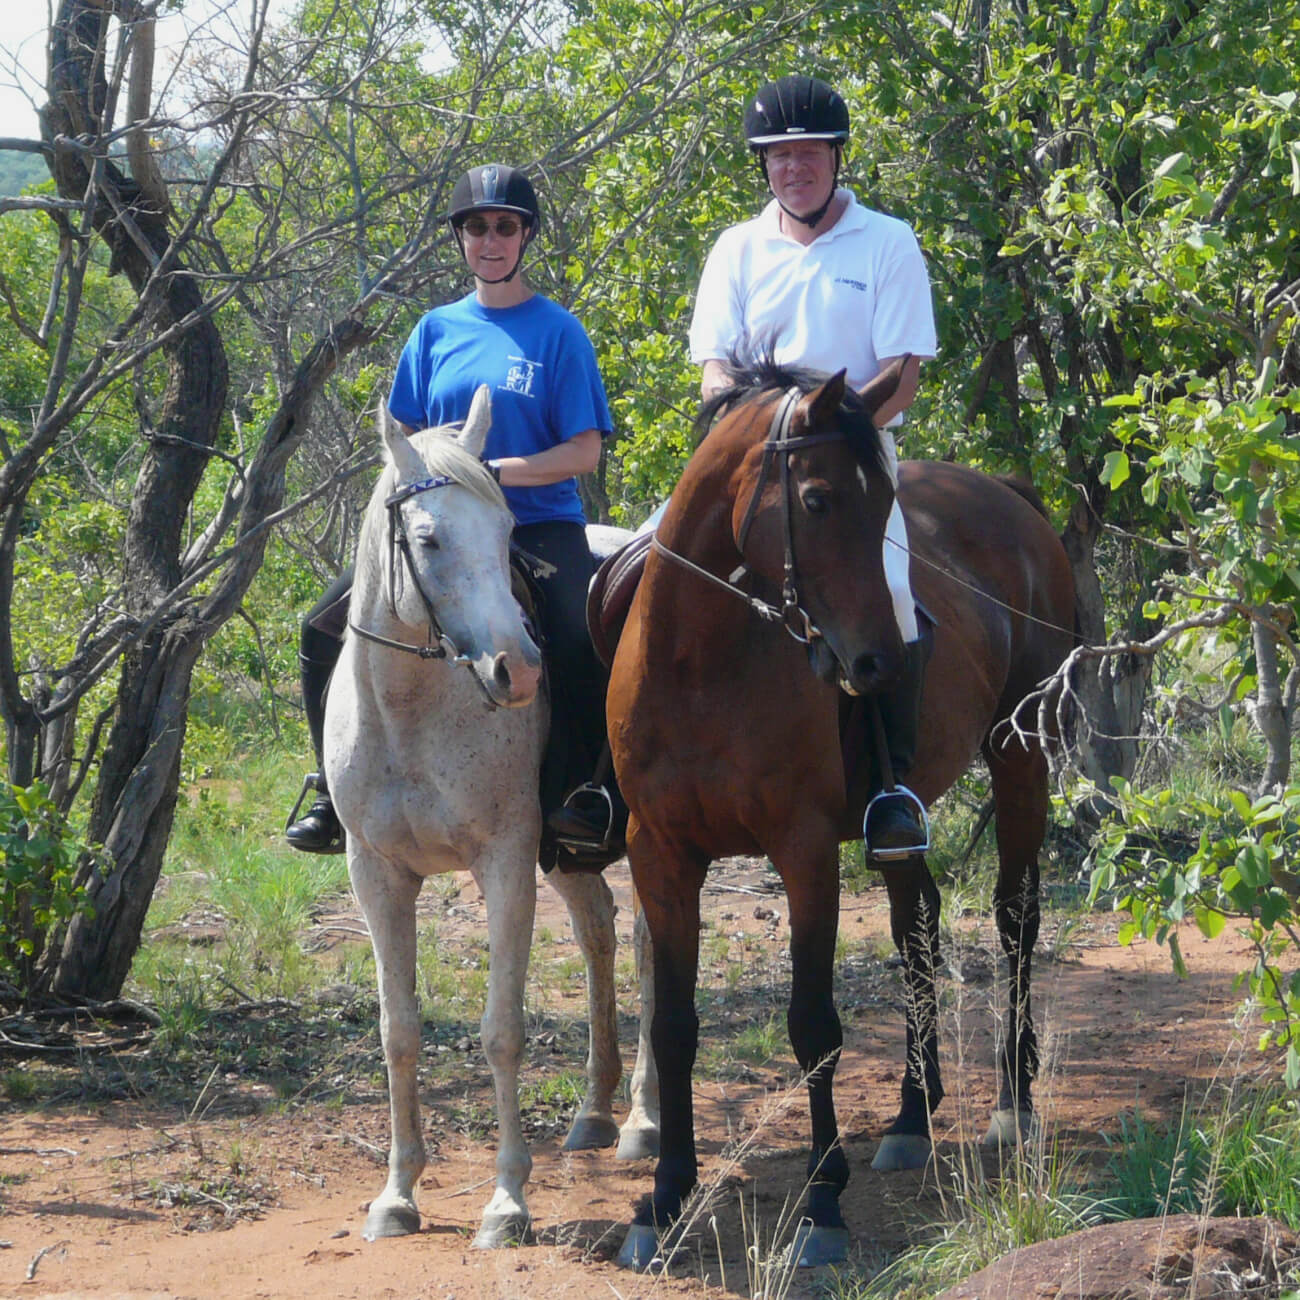 Brenda and John stop sitting on their horses on a trail